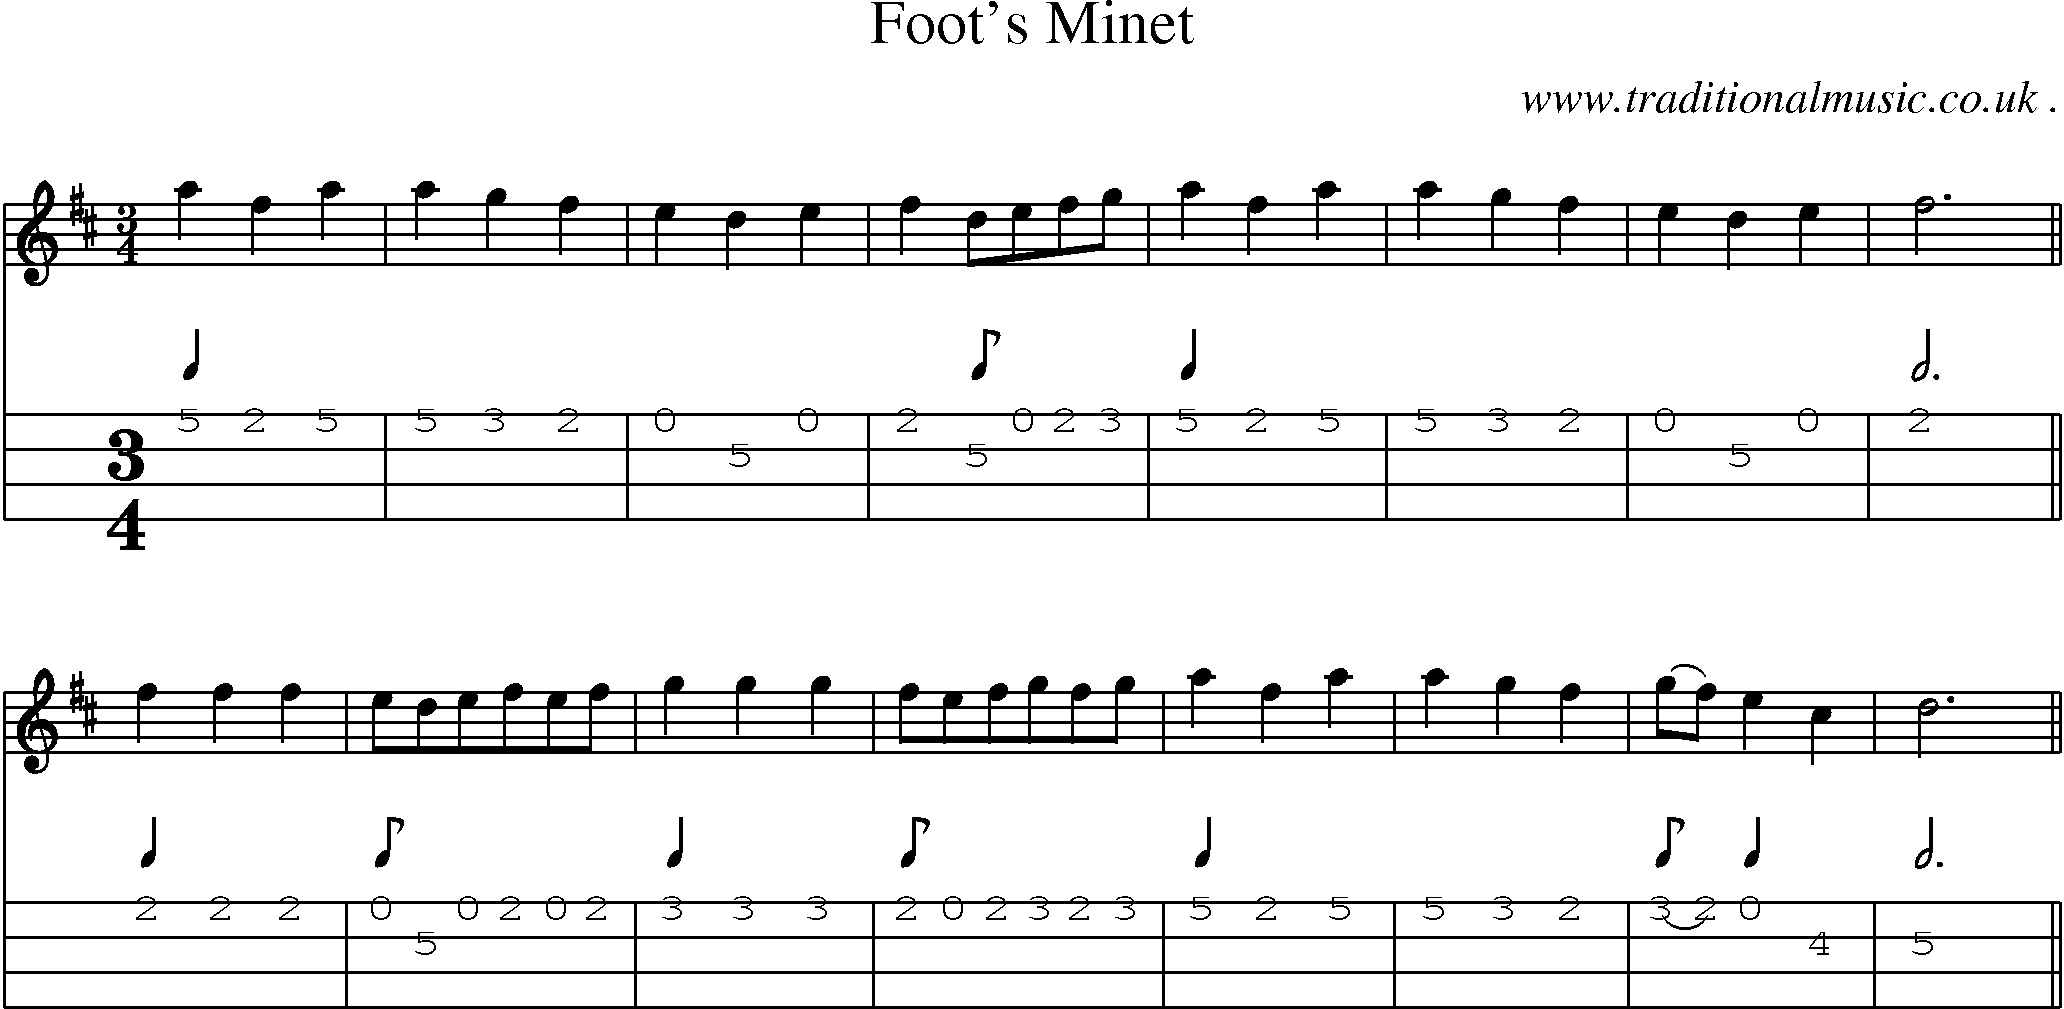 Sheet-Music and Mandolin Tabs for Foot Minet